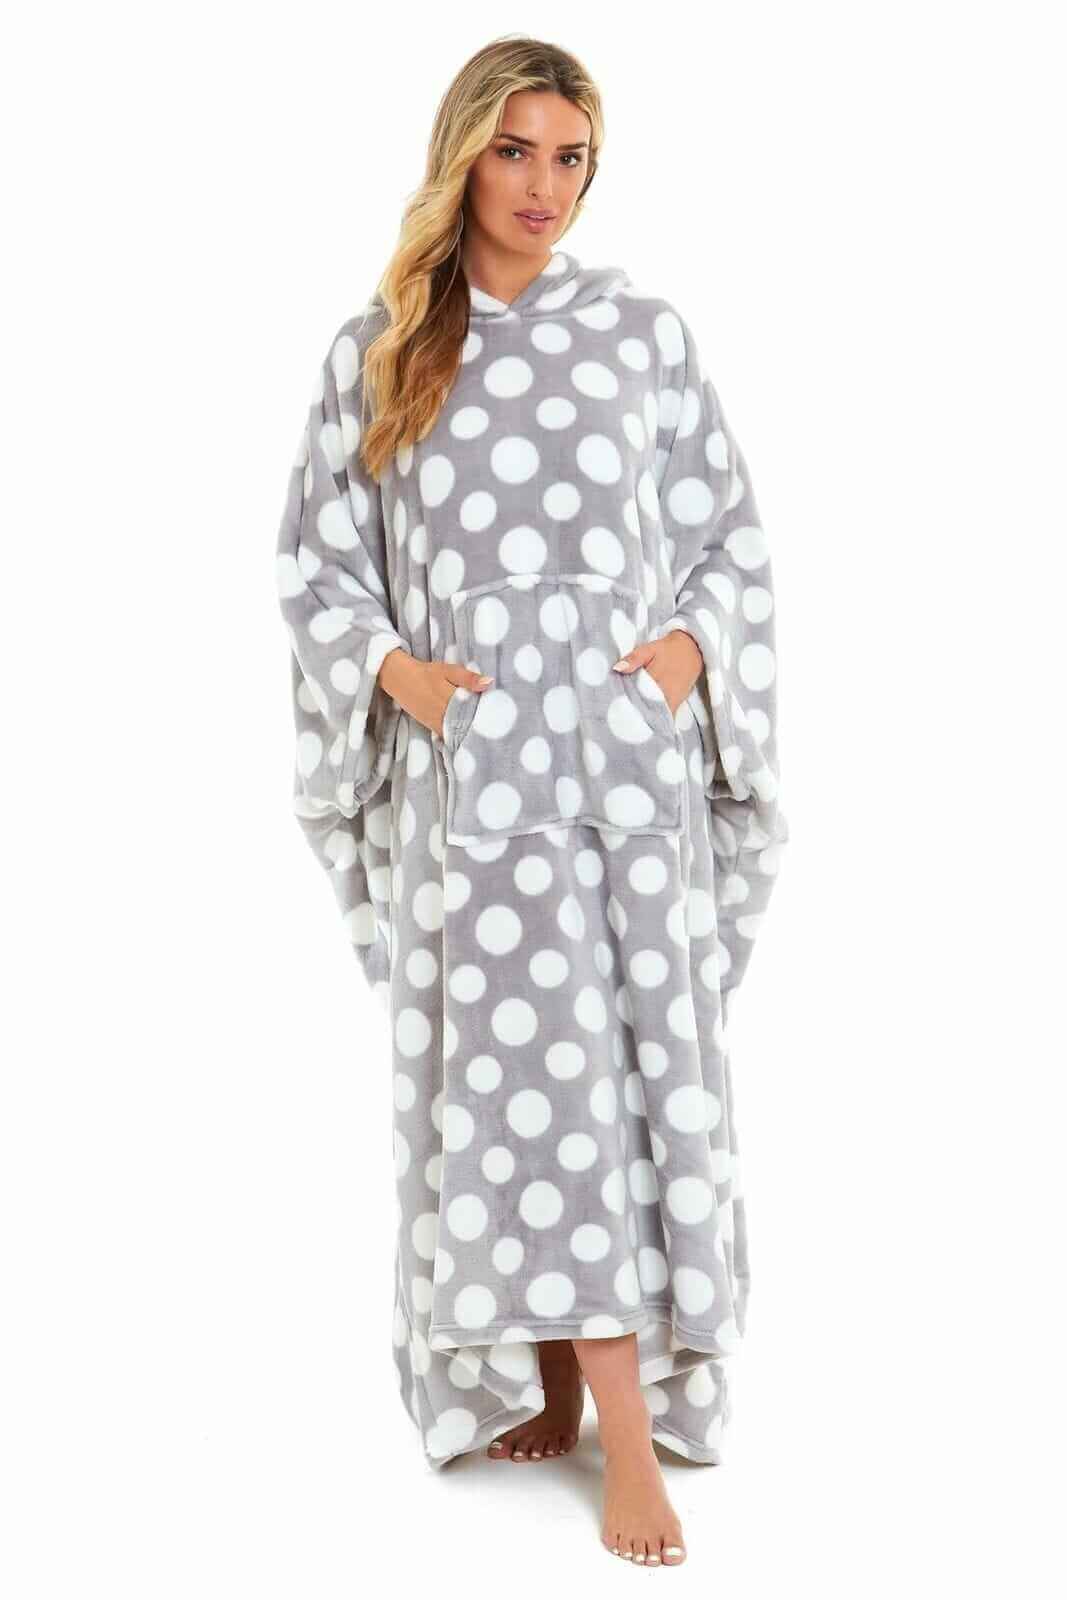 Women's Oversized Hooded Poncho Blanket, Stars & Polka Dot. Buy now for £25.00. A Hooded Blanket by Daisy Dreamer. blue, blush pink, charcoal, circles, clothing, dusky pink, faux fur, flannel, fleece, grey, hooded blanket, hot pink, loungewear, navy, nigh